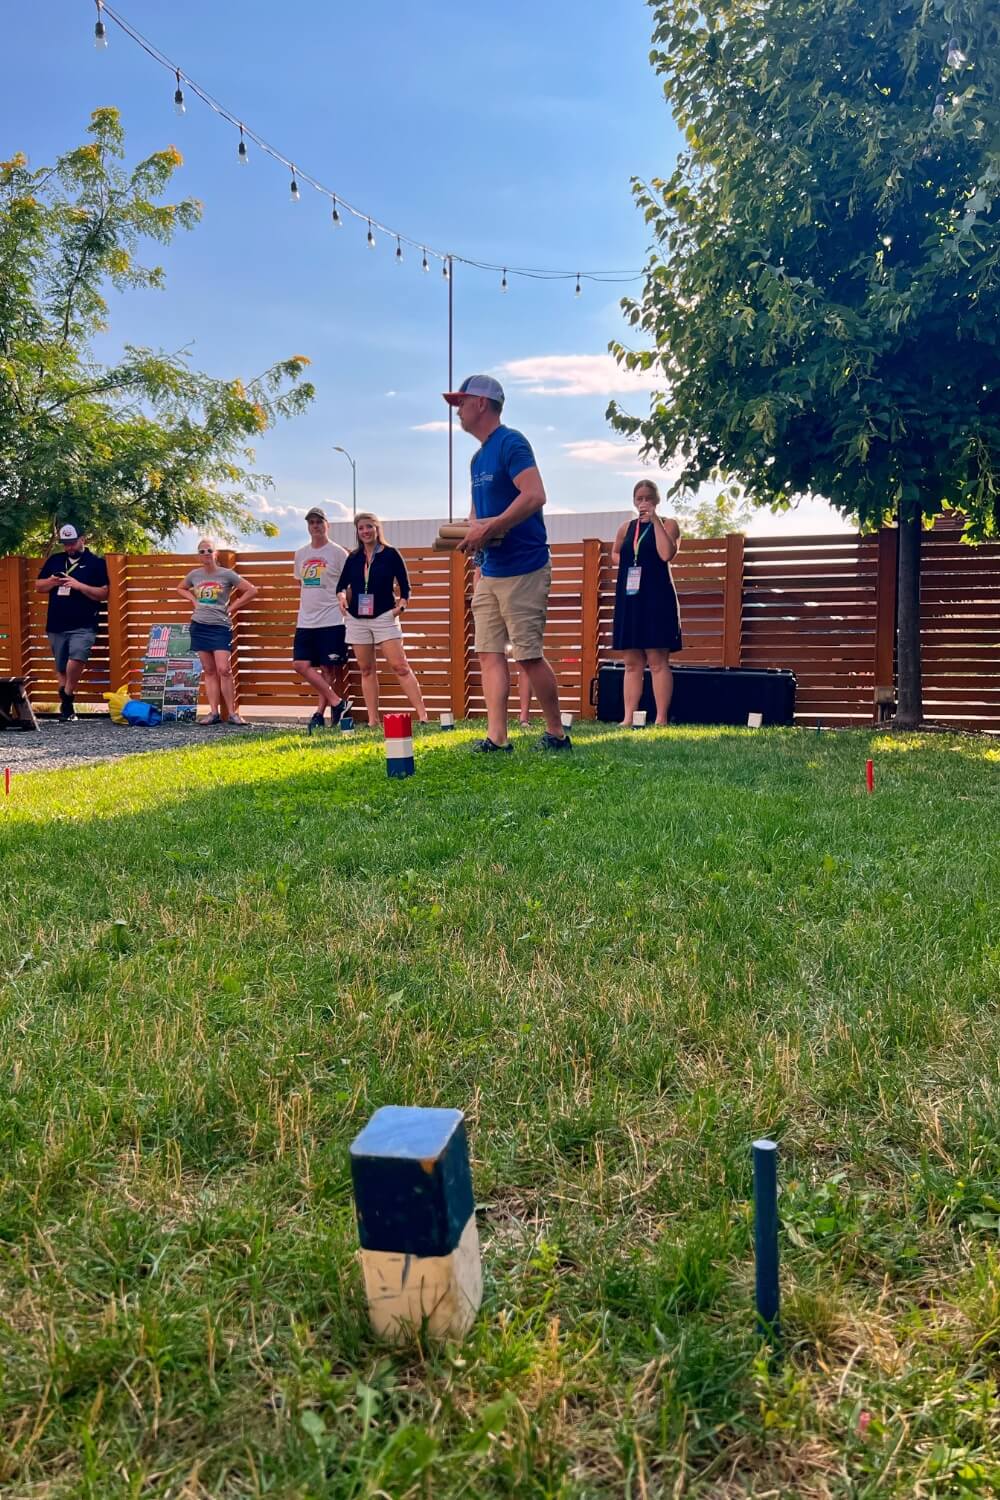 Eau Claire WI is the Kubb Capital of North America